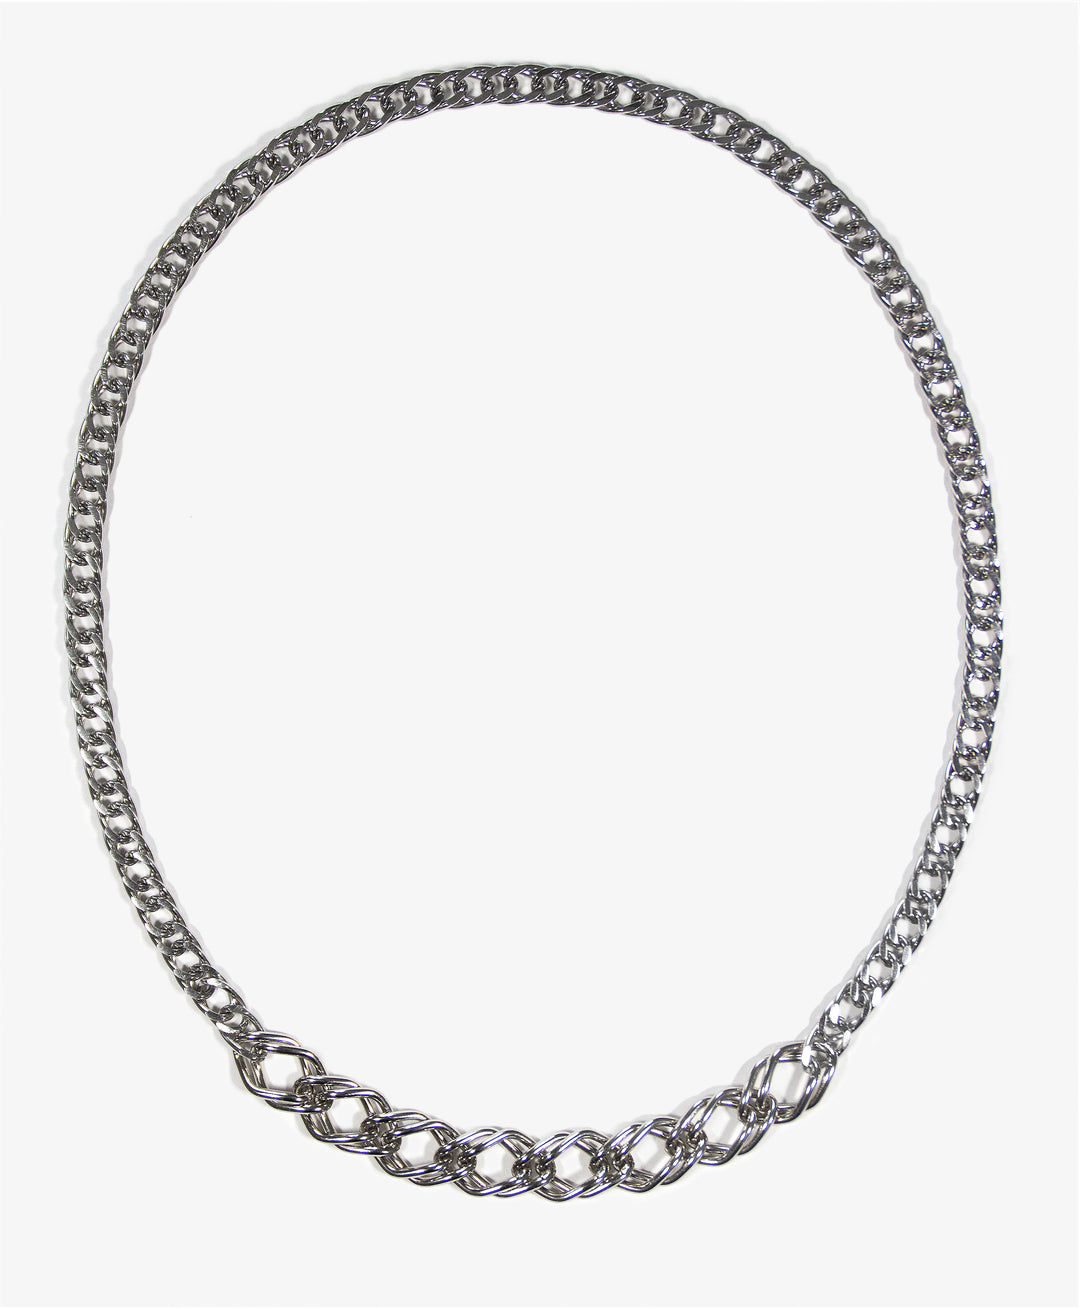 llayers-mens-women-jewelry-silver-stainlesssteel-choker-chain-necklace-unchained-007-Brooklyn-New-York-1